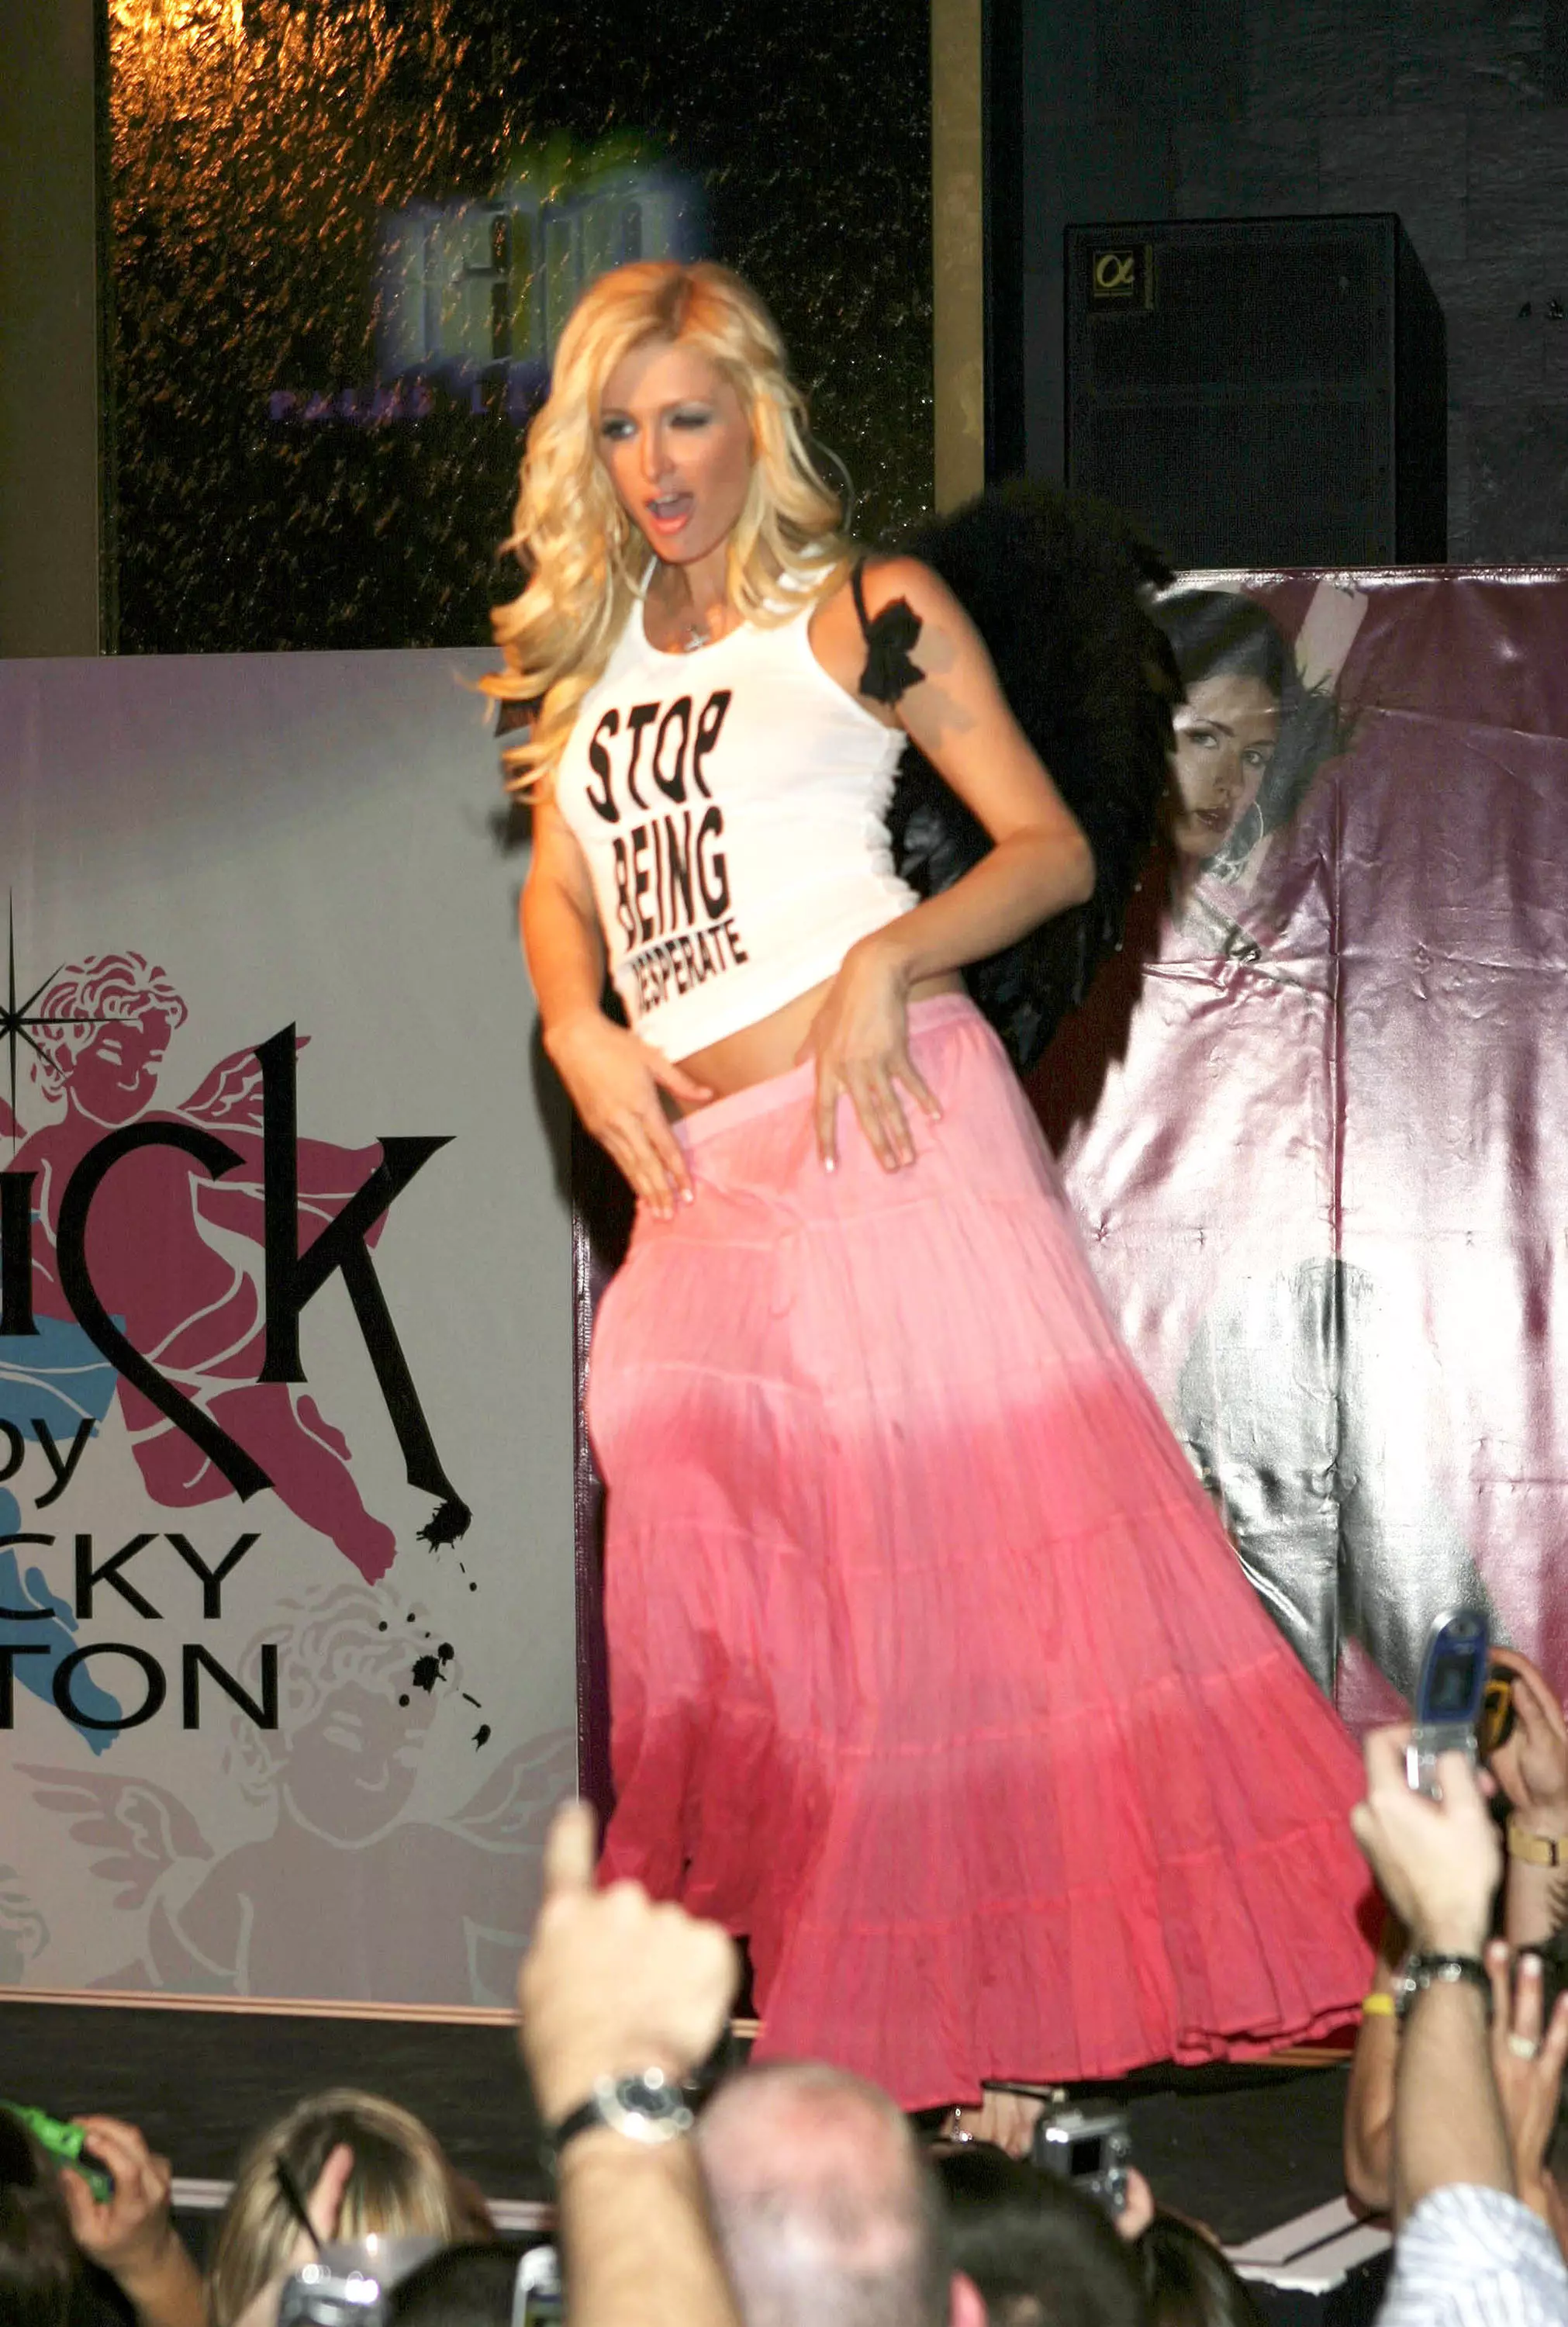 Paris Hilton in the real T-Shirt at her sister Nicky's fashion launch in 2005.